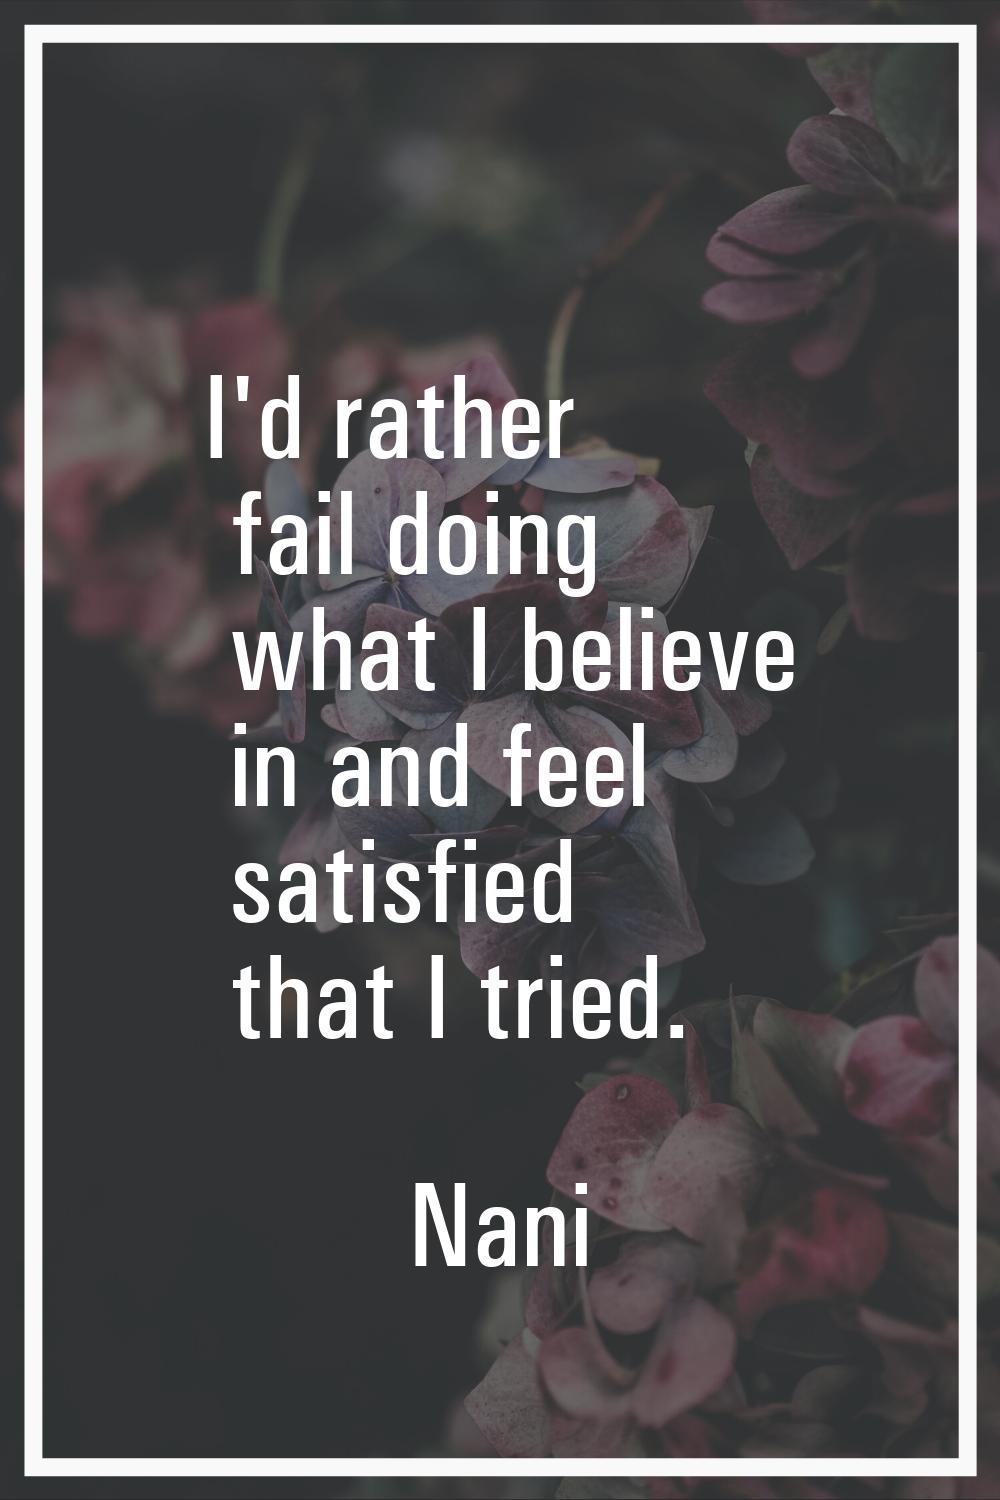 I'd rather fail doing what I believe in and feel satisfied that I tried.